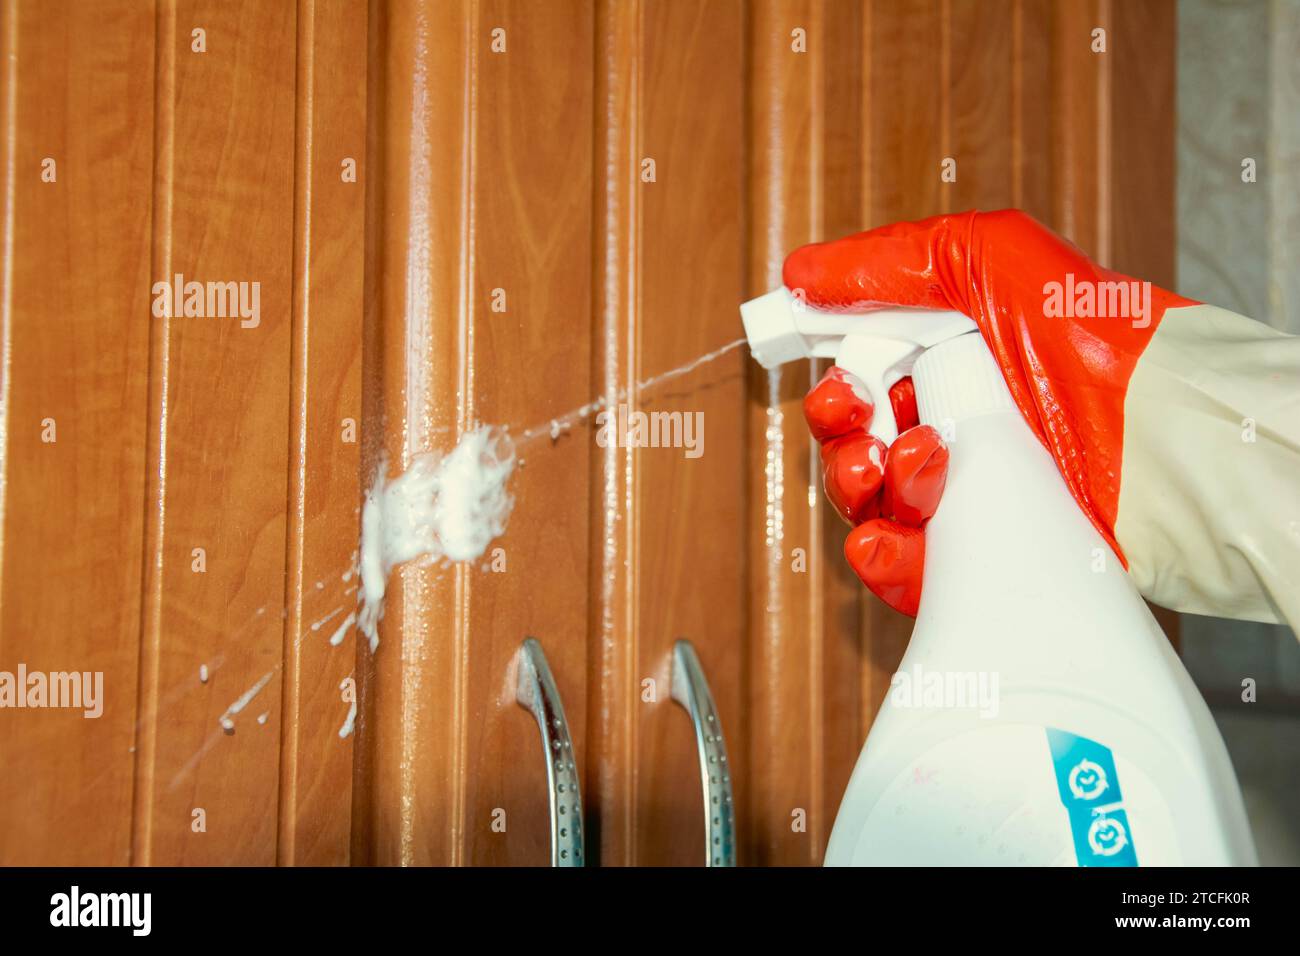 A housewife wearing rubber gloves is diligently cleaning the kitchen cupboard with a sponge and detergent, ensuring a spotless and hygienic environmen Stock Photo